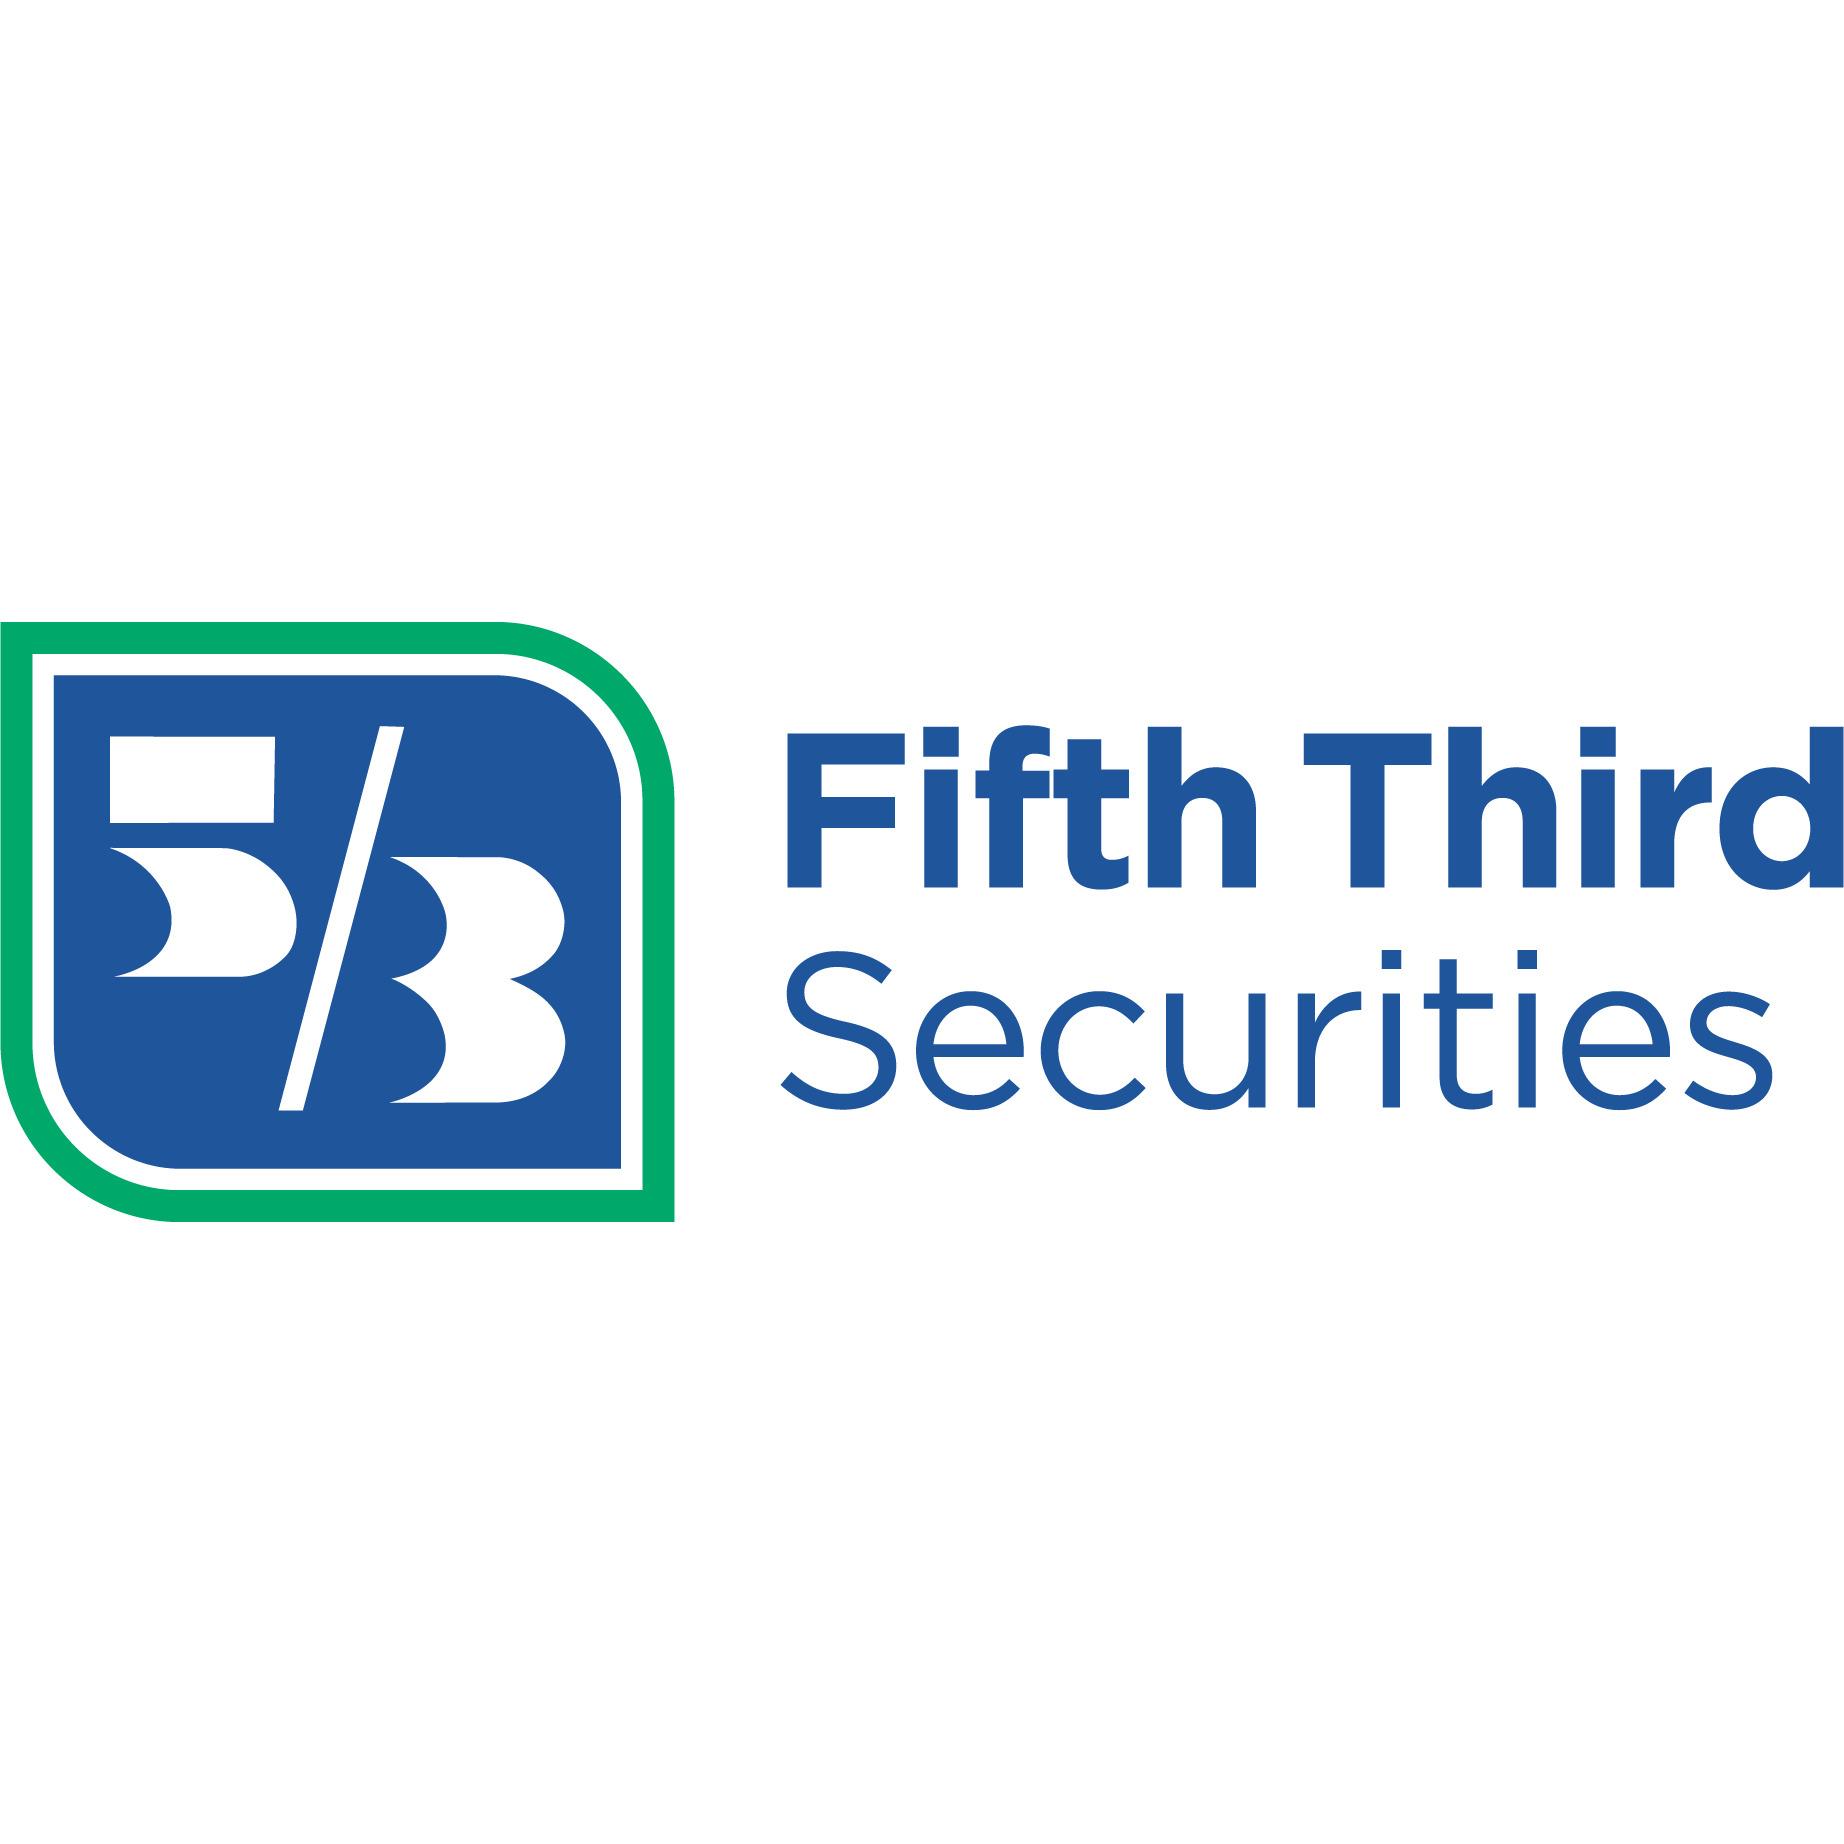 Fifth Third Securities - Michael Zingale